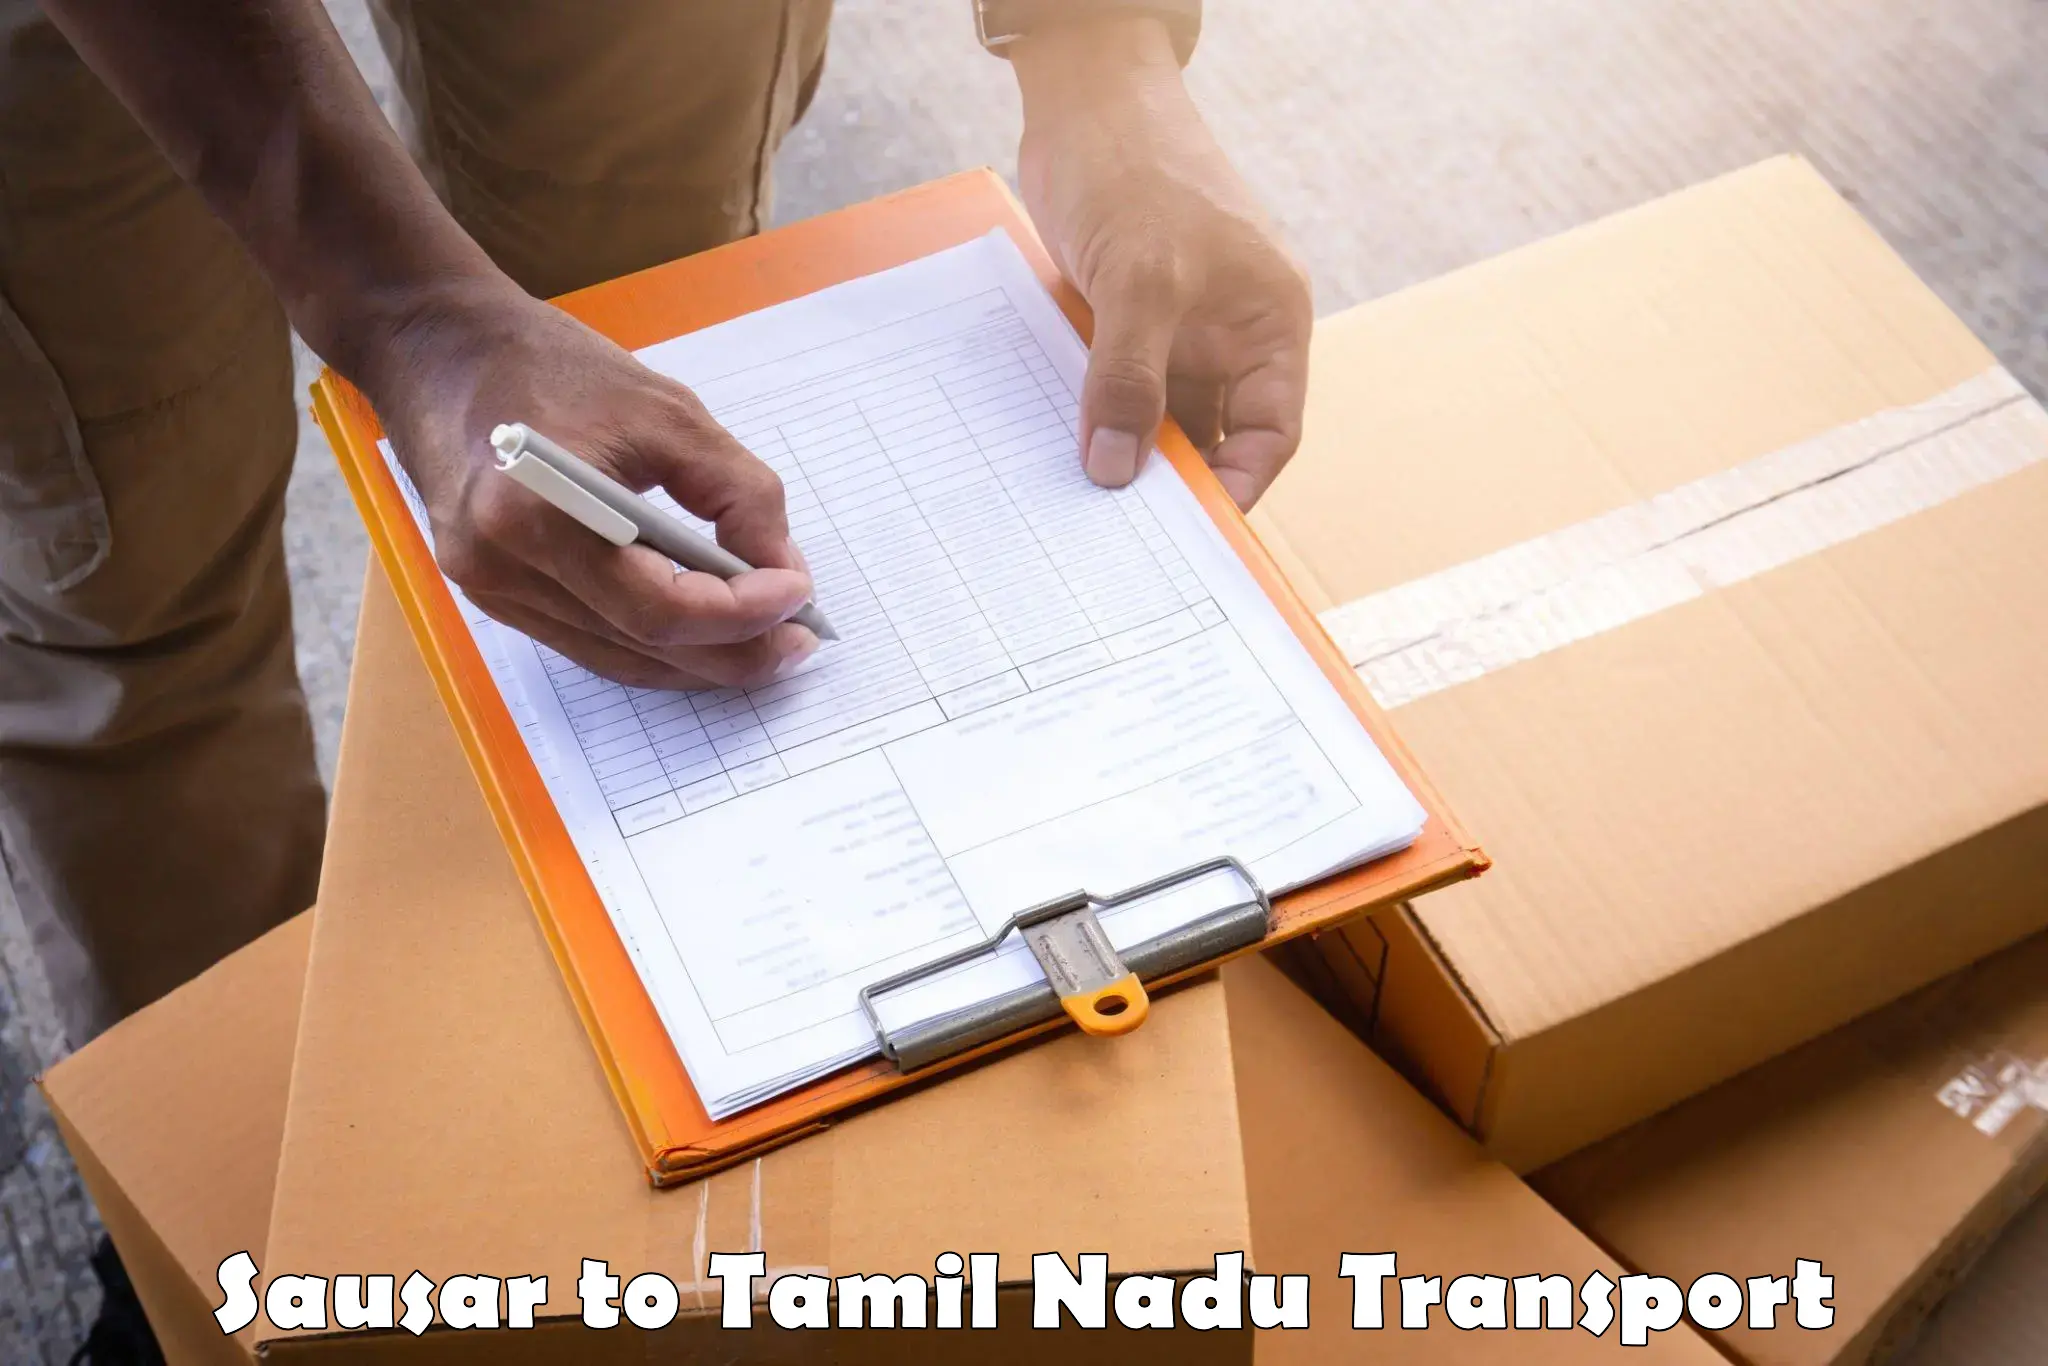 Domestic goods transportation services Sausar to Mayiladuthurai